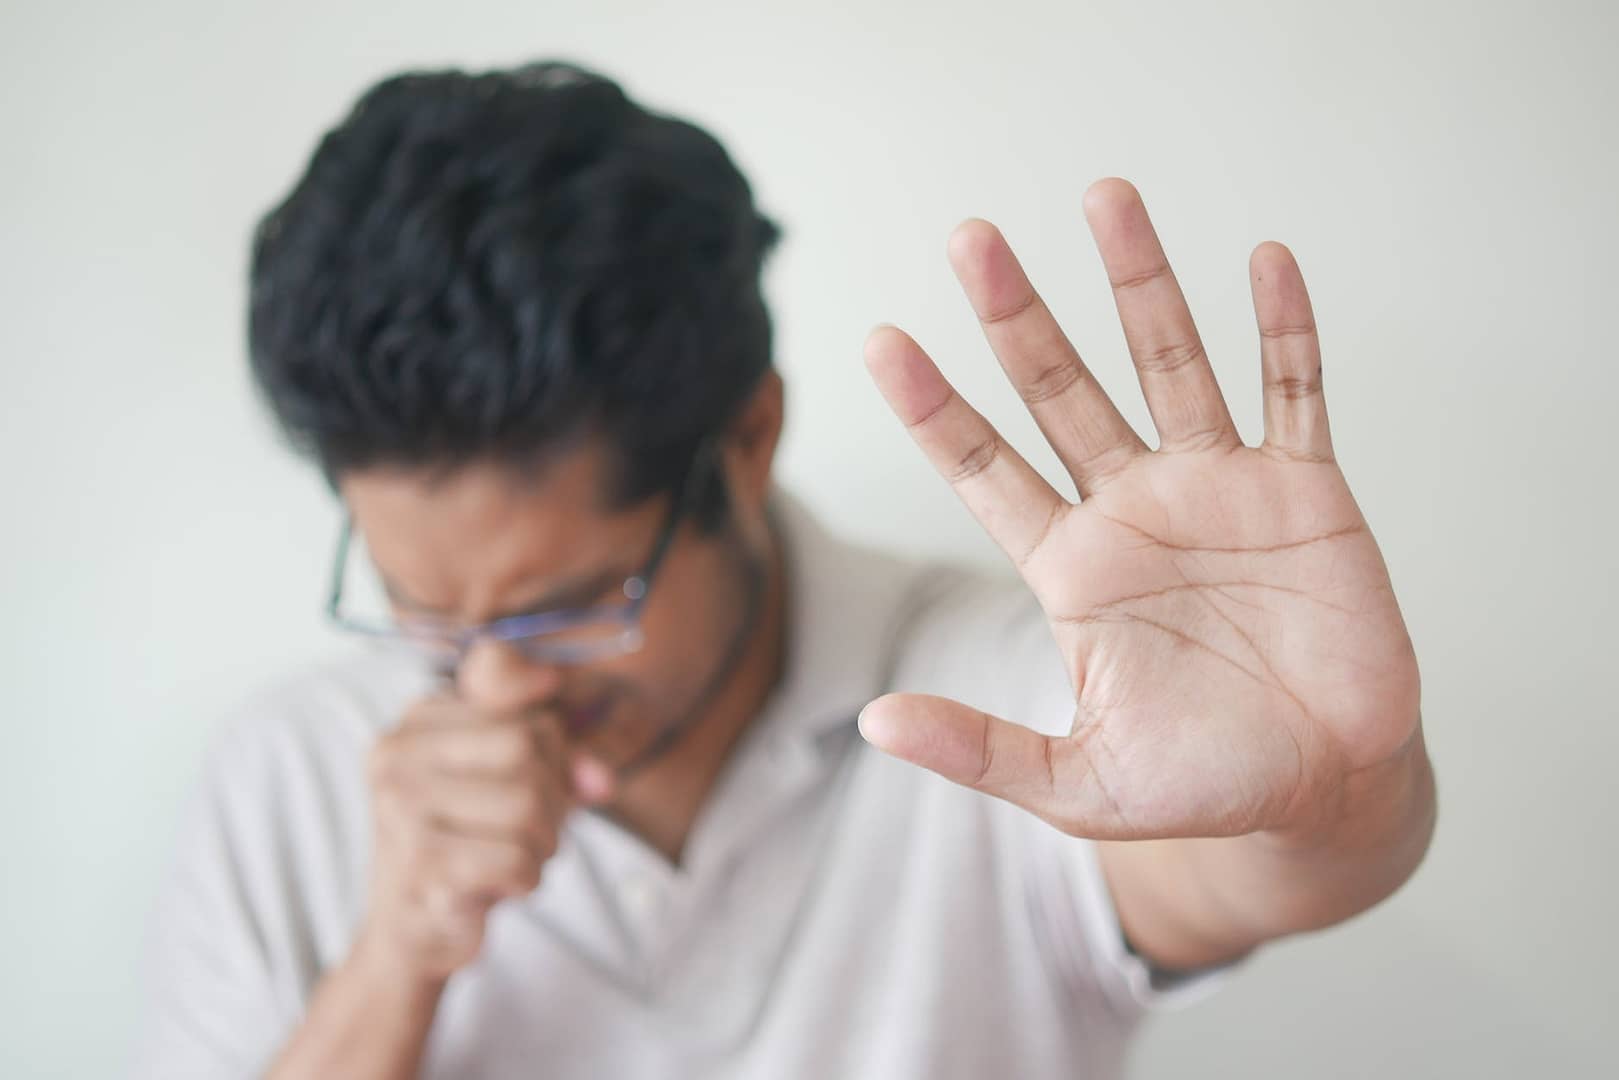 selective focus photo of coughing man s hand